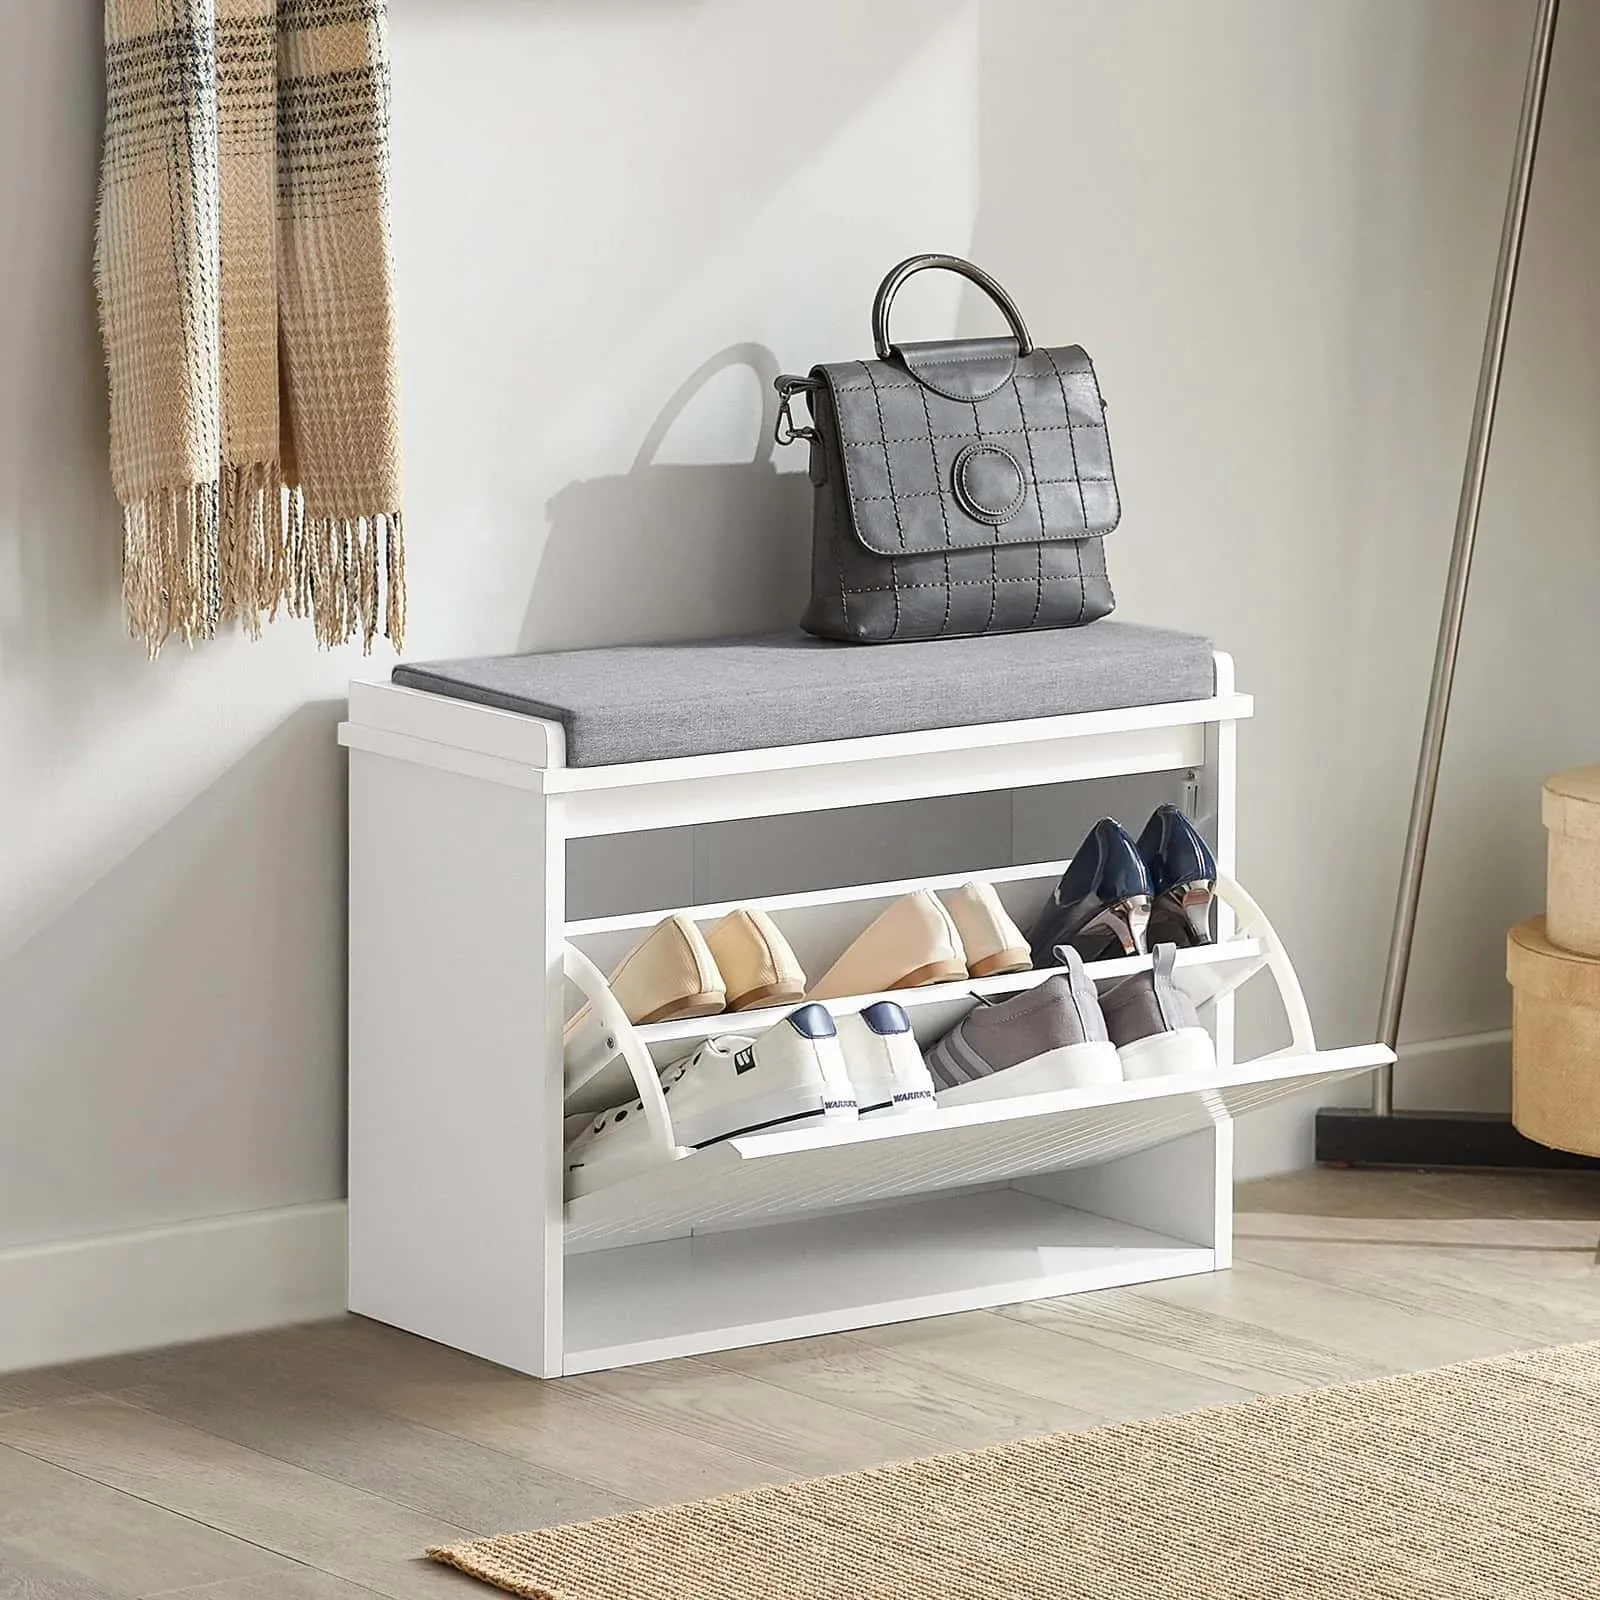 shoe rack with comfortable cushion seating, wall painting, grey bag on the rack